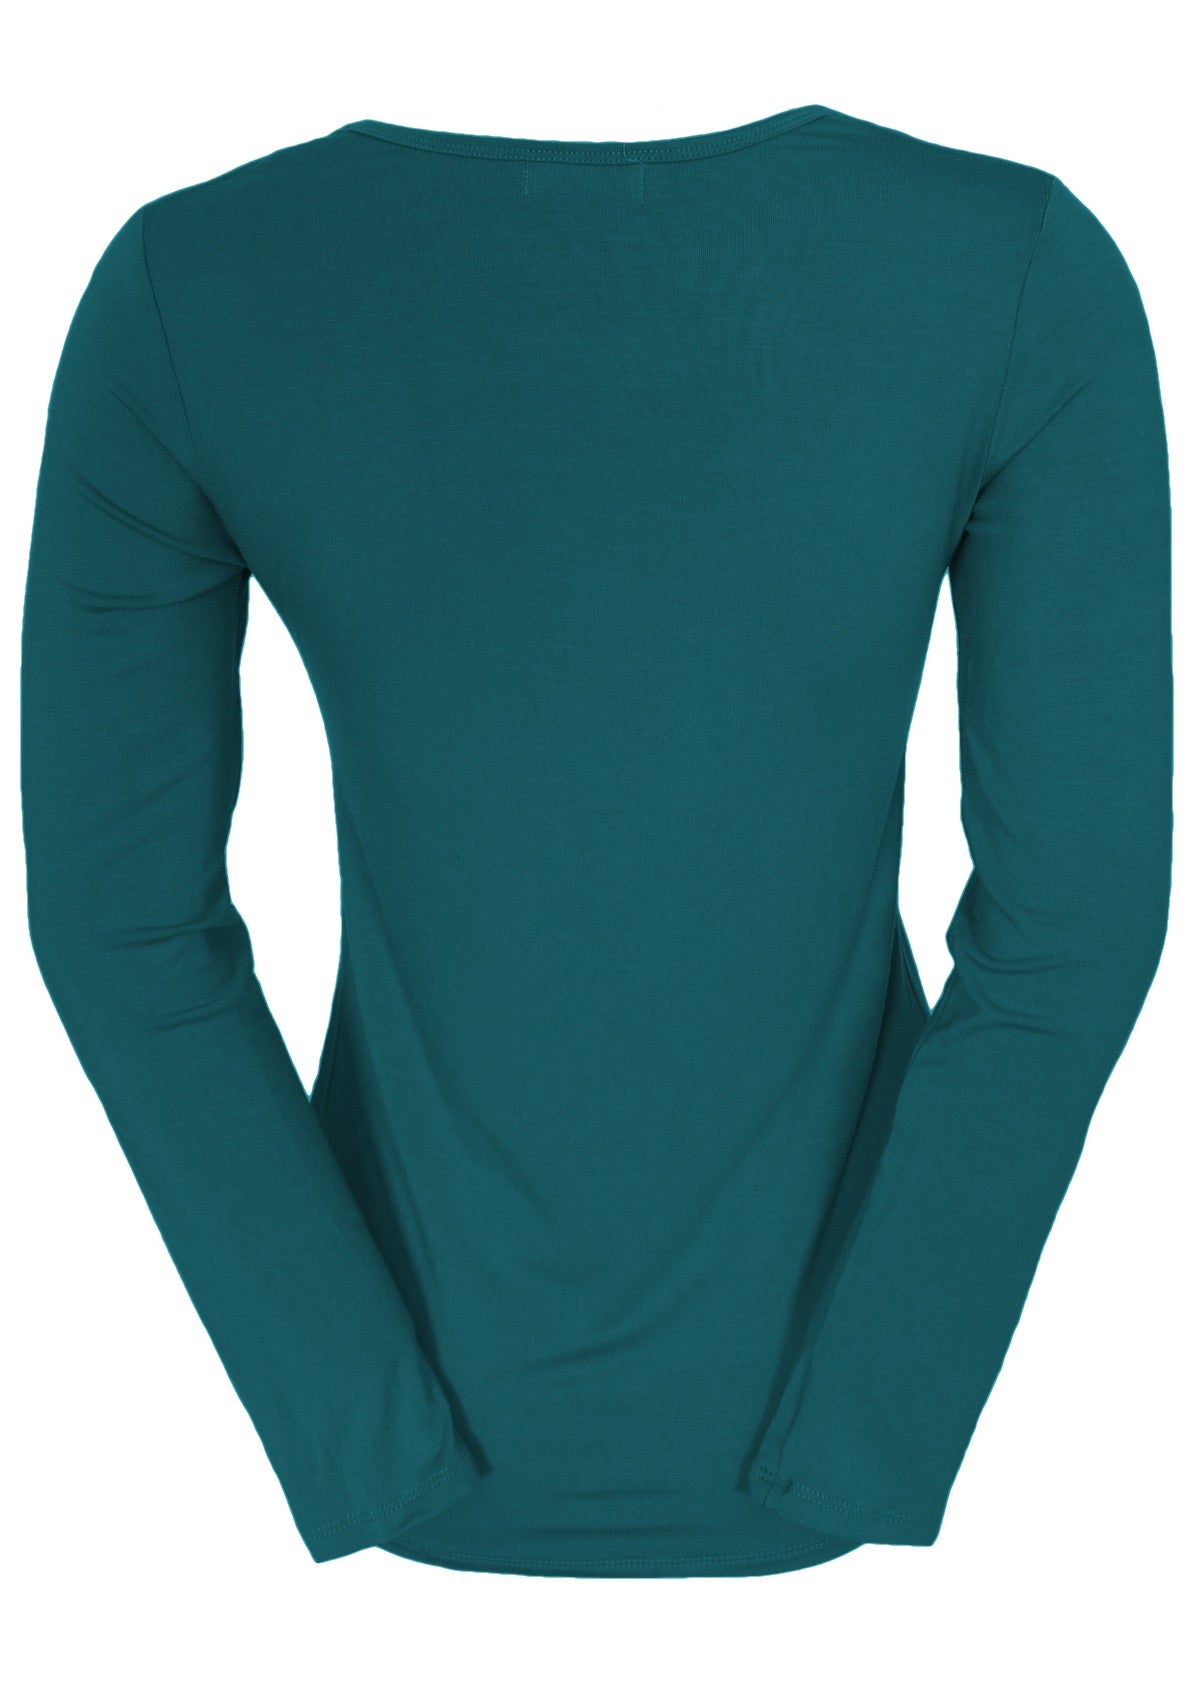 Back view of women's round neck teal long sleeve rayon top.